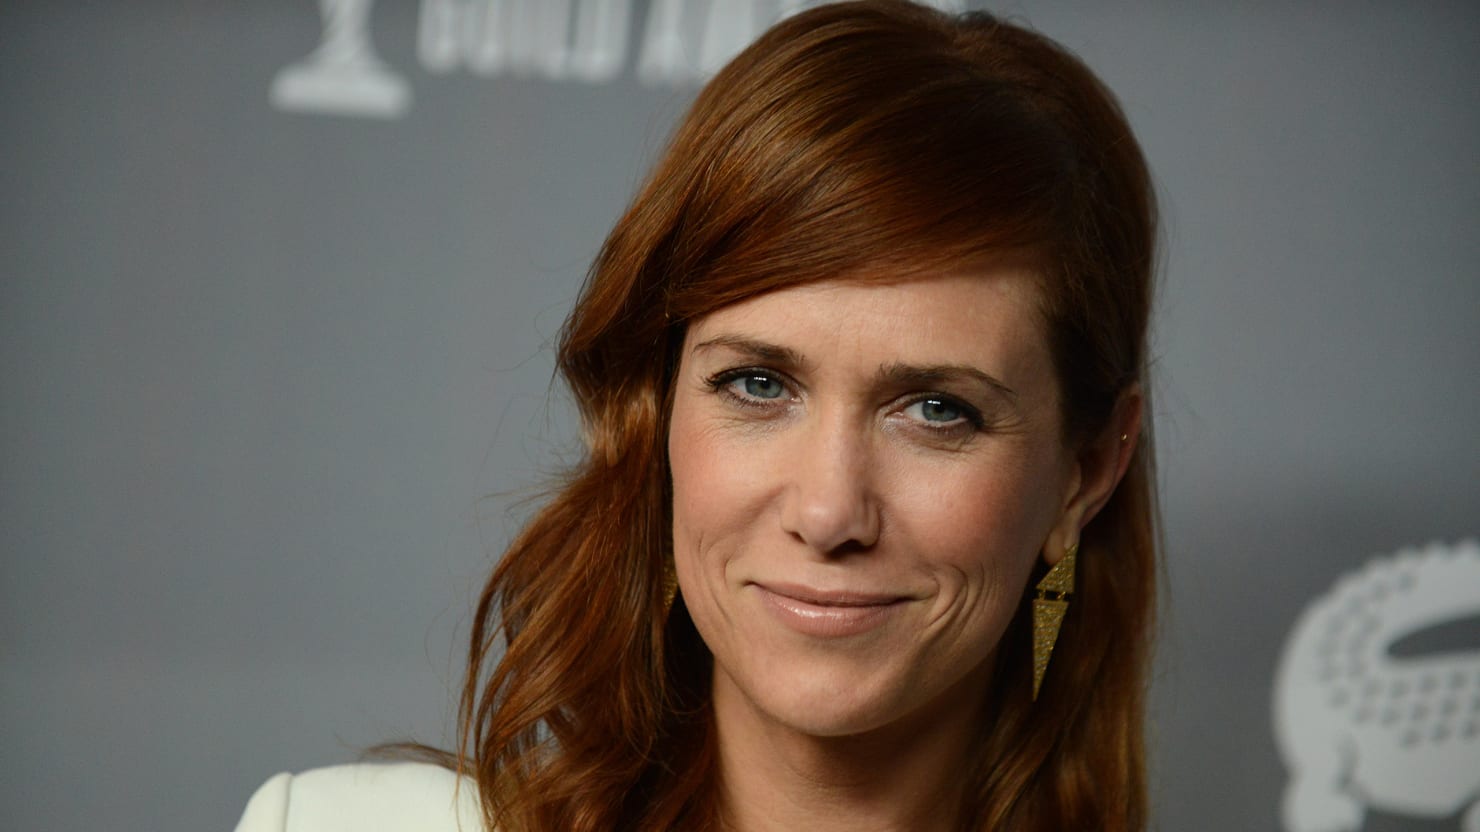 Is Kristen Wiig Still 'Girl Most Likely' to Succeed? 